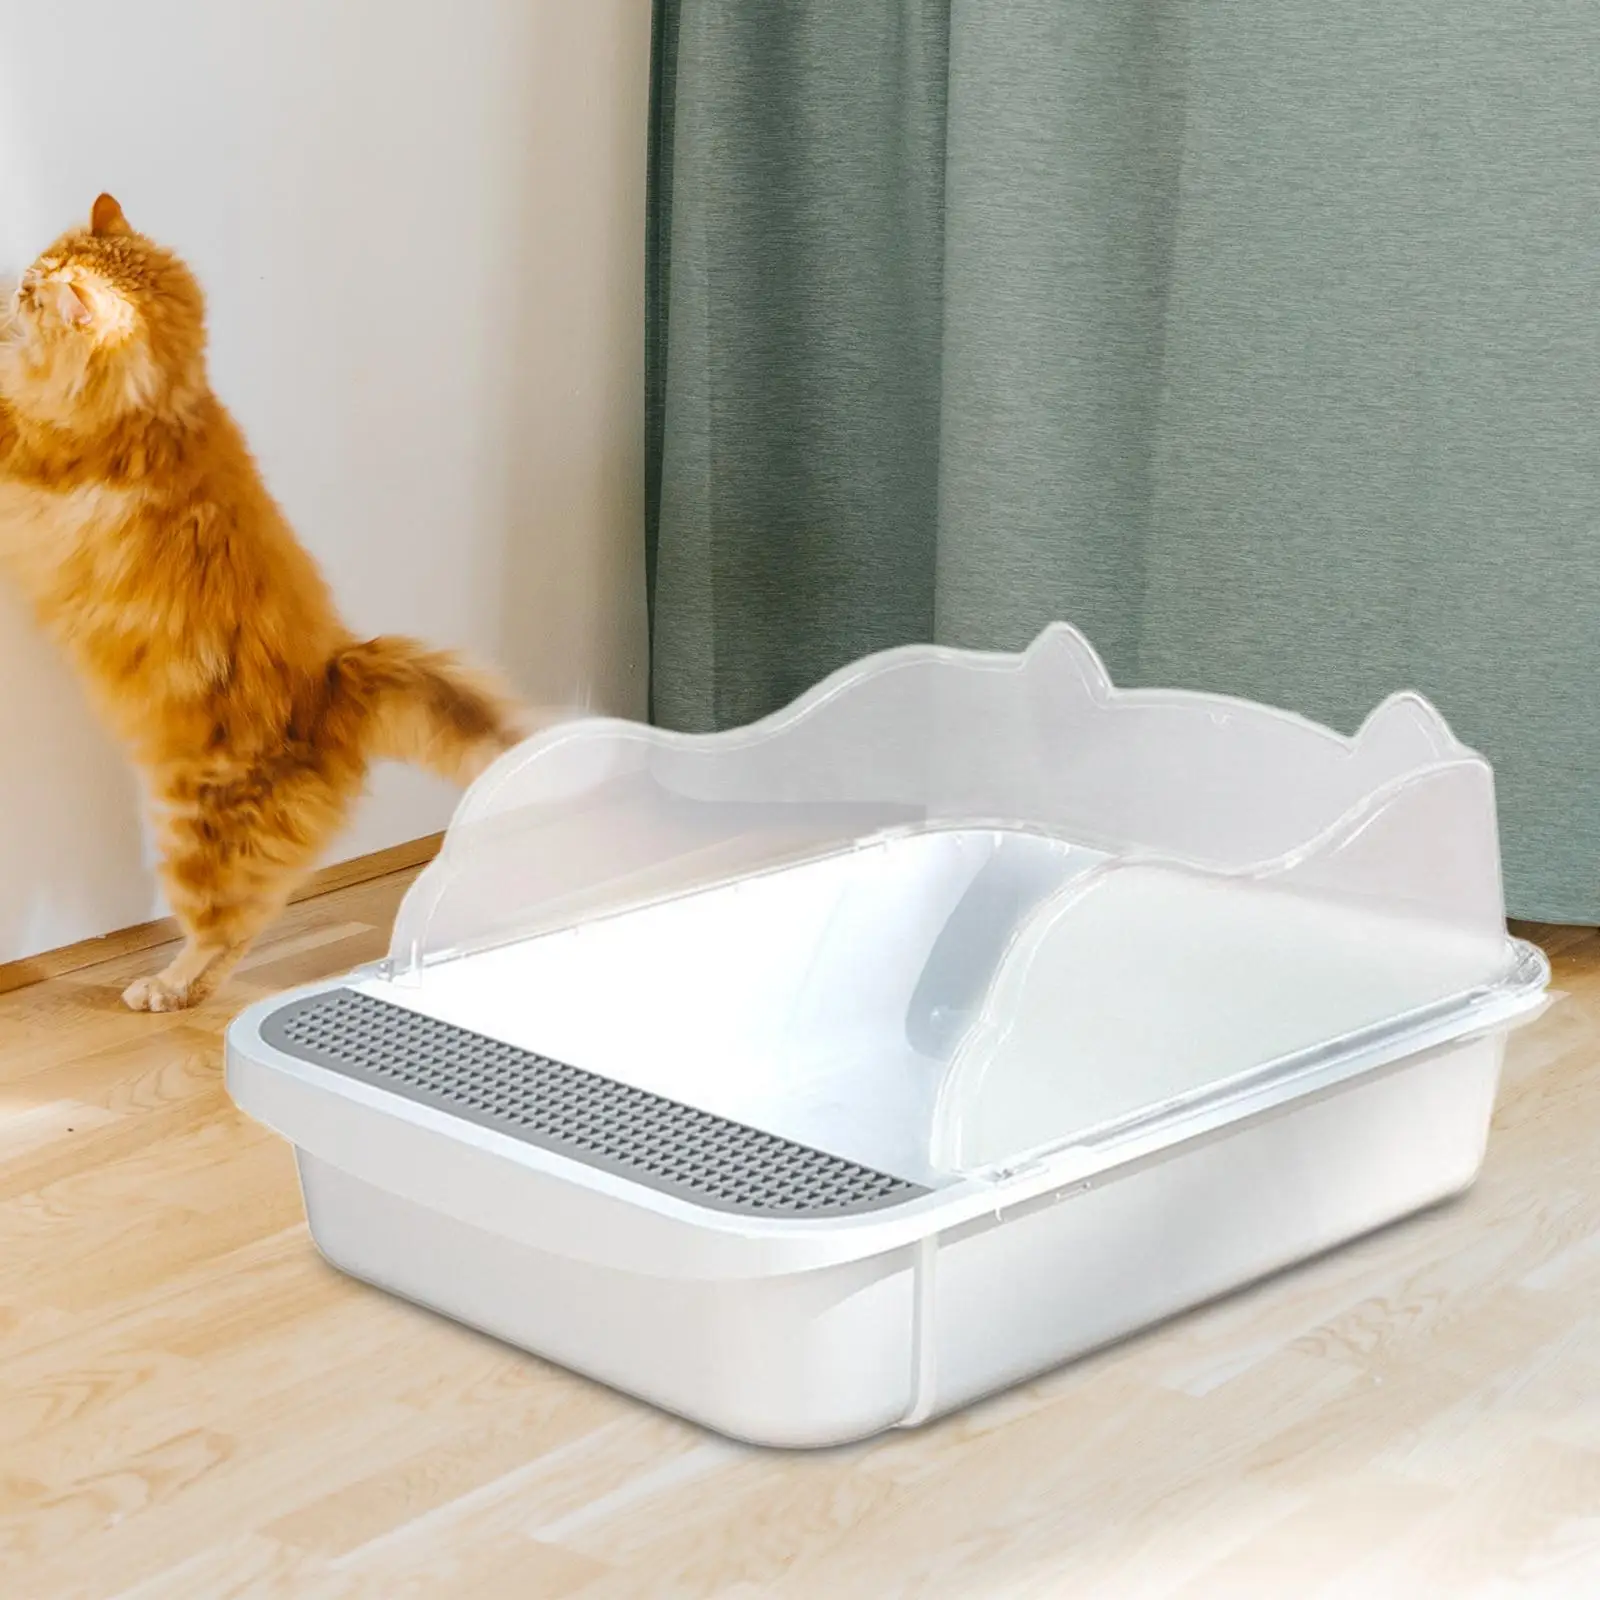 Cat Litter Tray Cat Sand Box Cats Potty Toilet Pet Supplies Pet Litter Tray Litter Pan for Dog Rabbits Puppy Indoor Cats